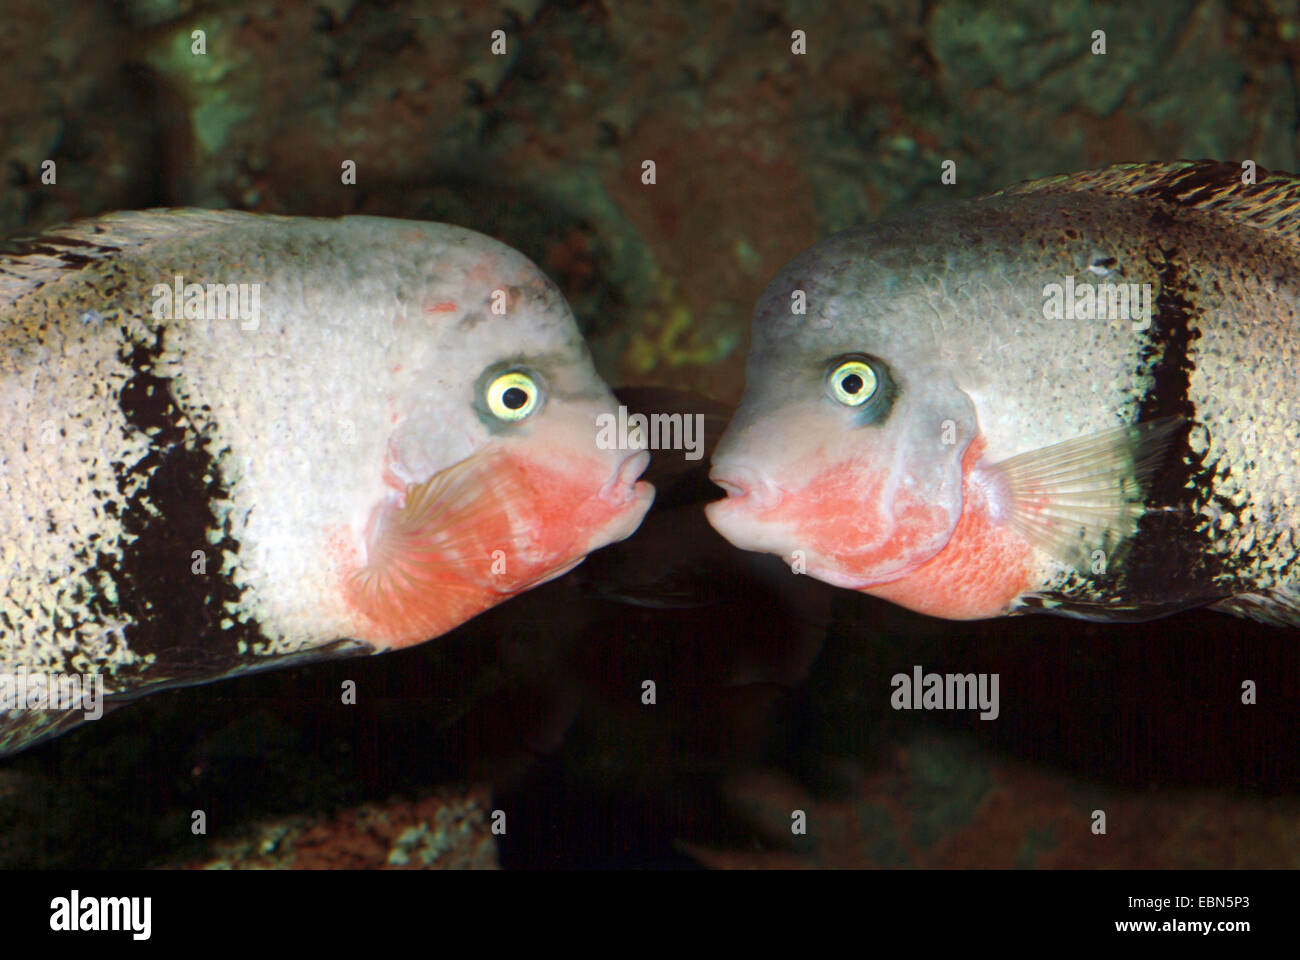 Spotted Belt Cichlid, Black Belt Cichlid (Vieja maculicauda), two Spotted Belt Cichlids looking at each other Stock Photo